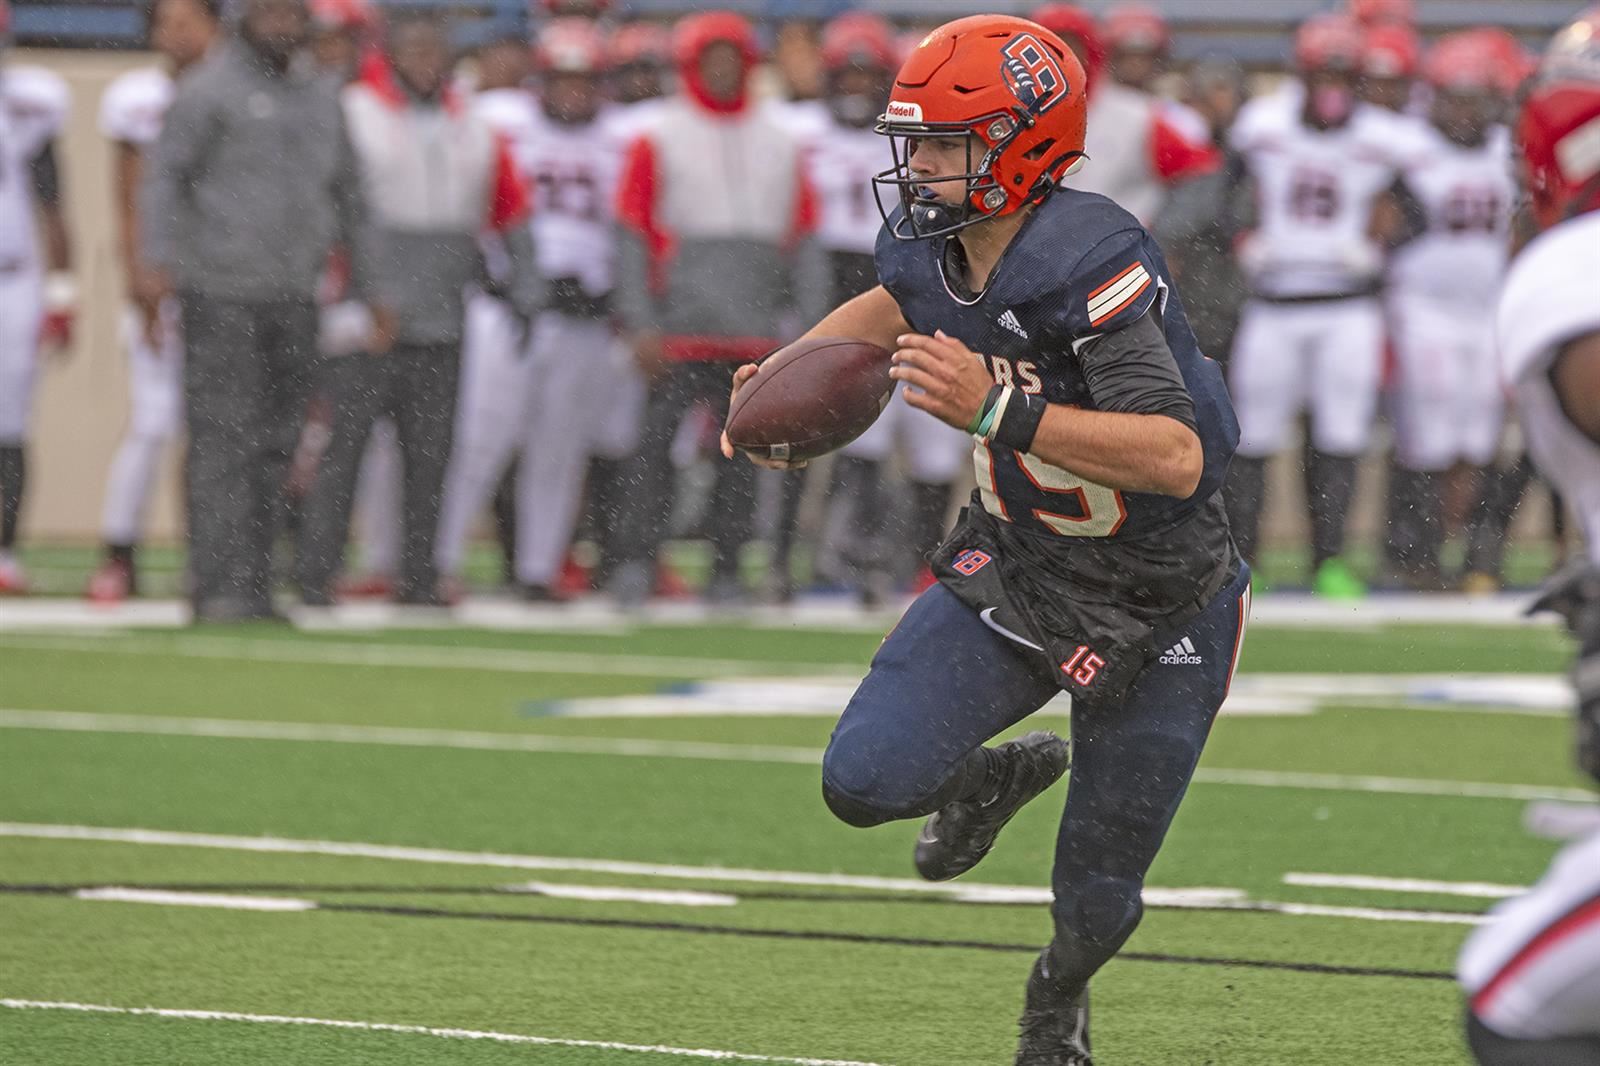 Bridgeland senior quarterback Conner Weigman is among 10 finalists for the Touchdown Club of Houston OPOY.